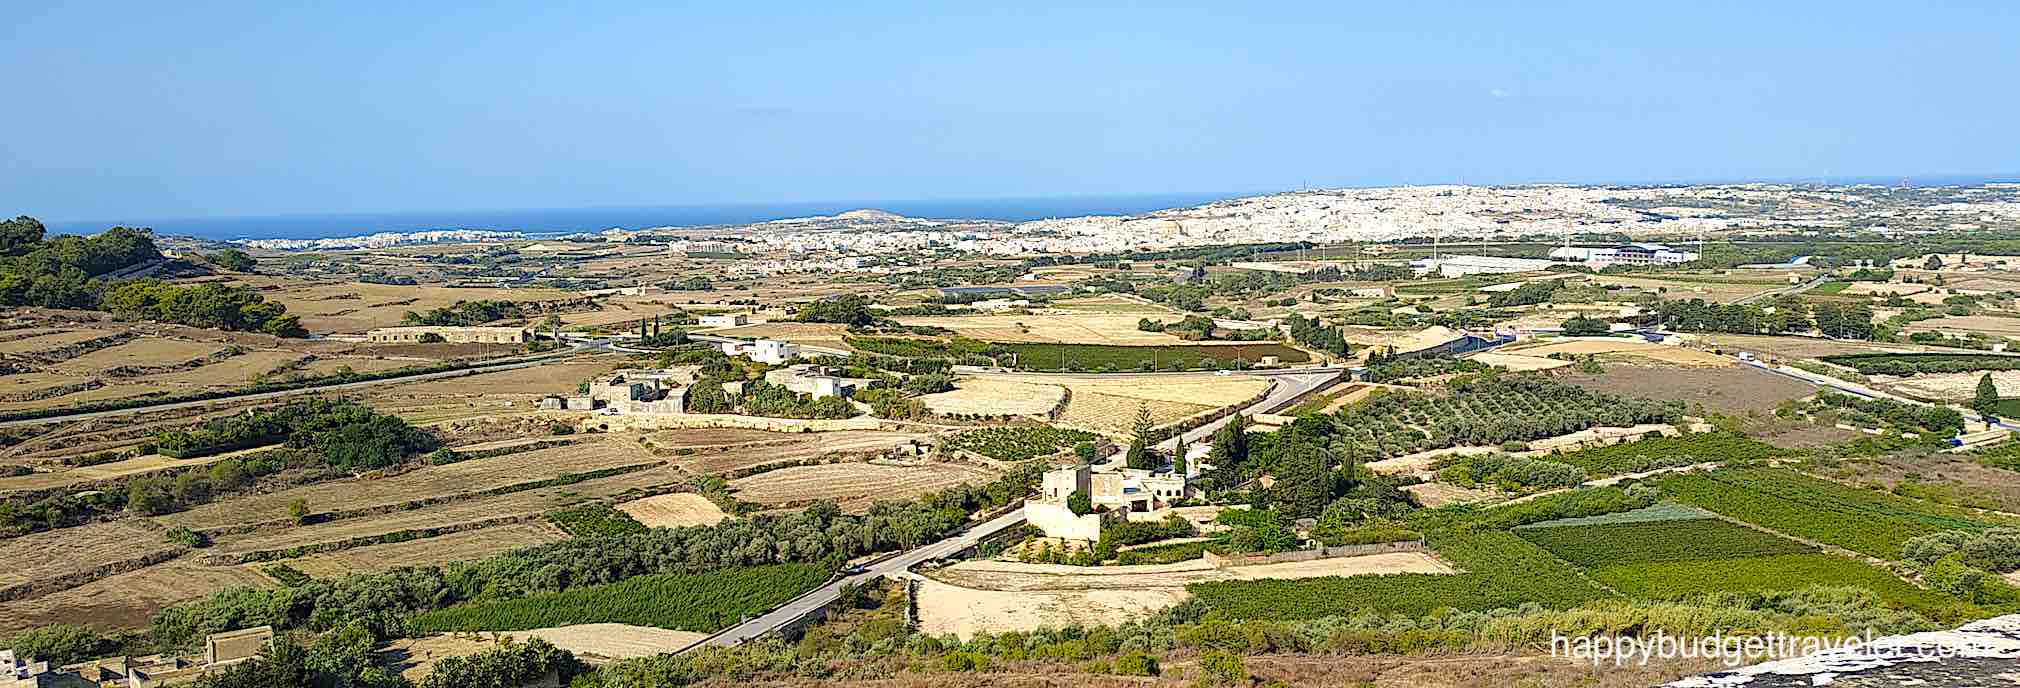 Picture of a view of the countryside in Mdina from Panoramic Malta Viewpoint